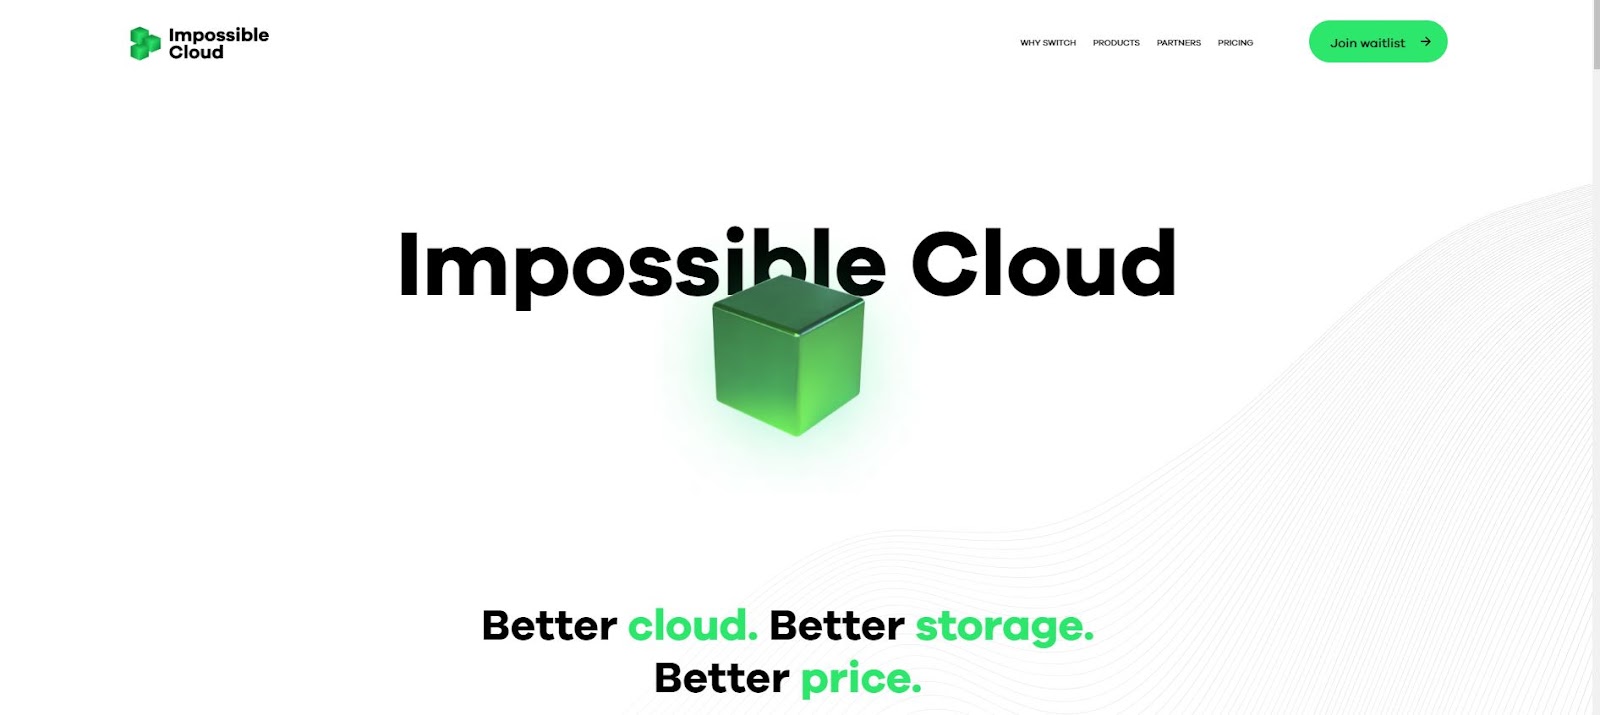 Introducing Impossible Cloud, the innovative startup that is revolutionizing cloud storage